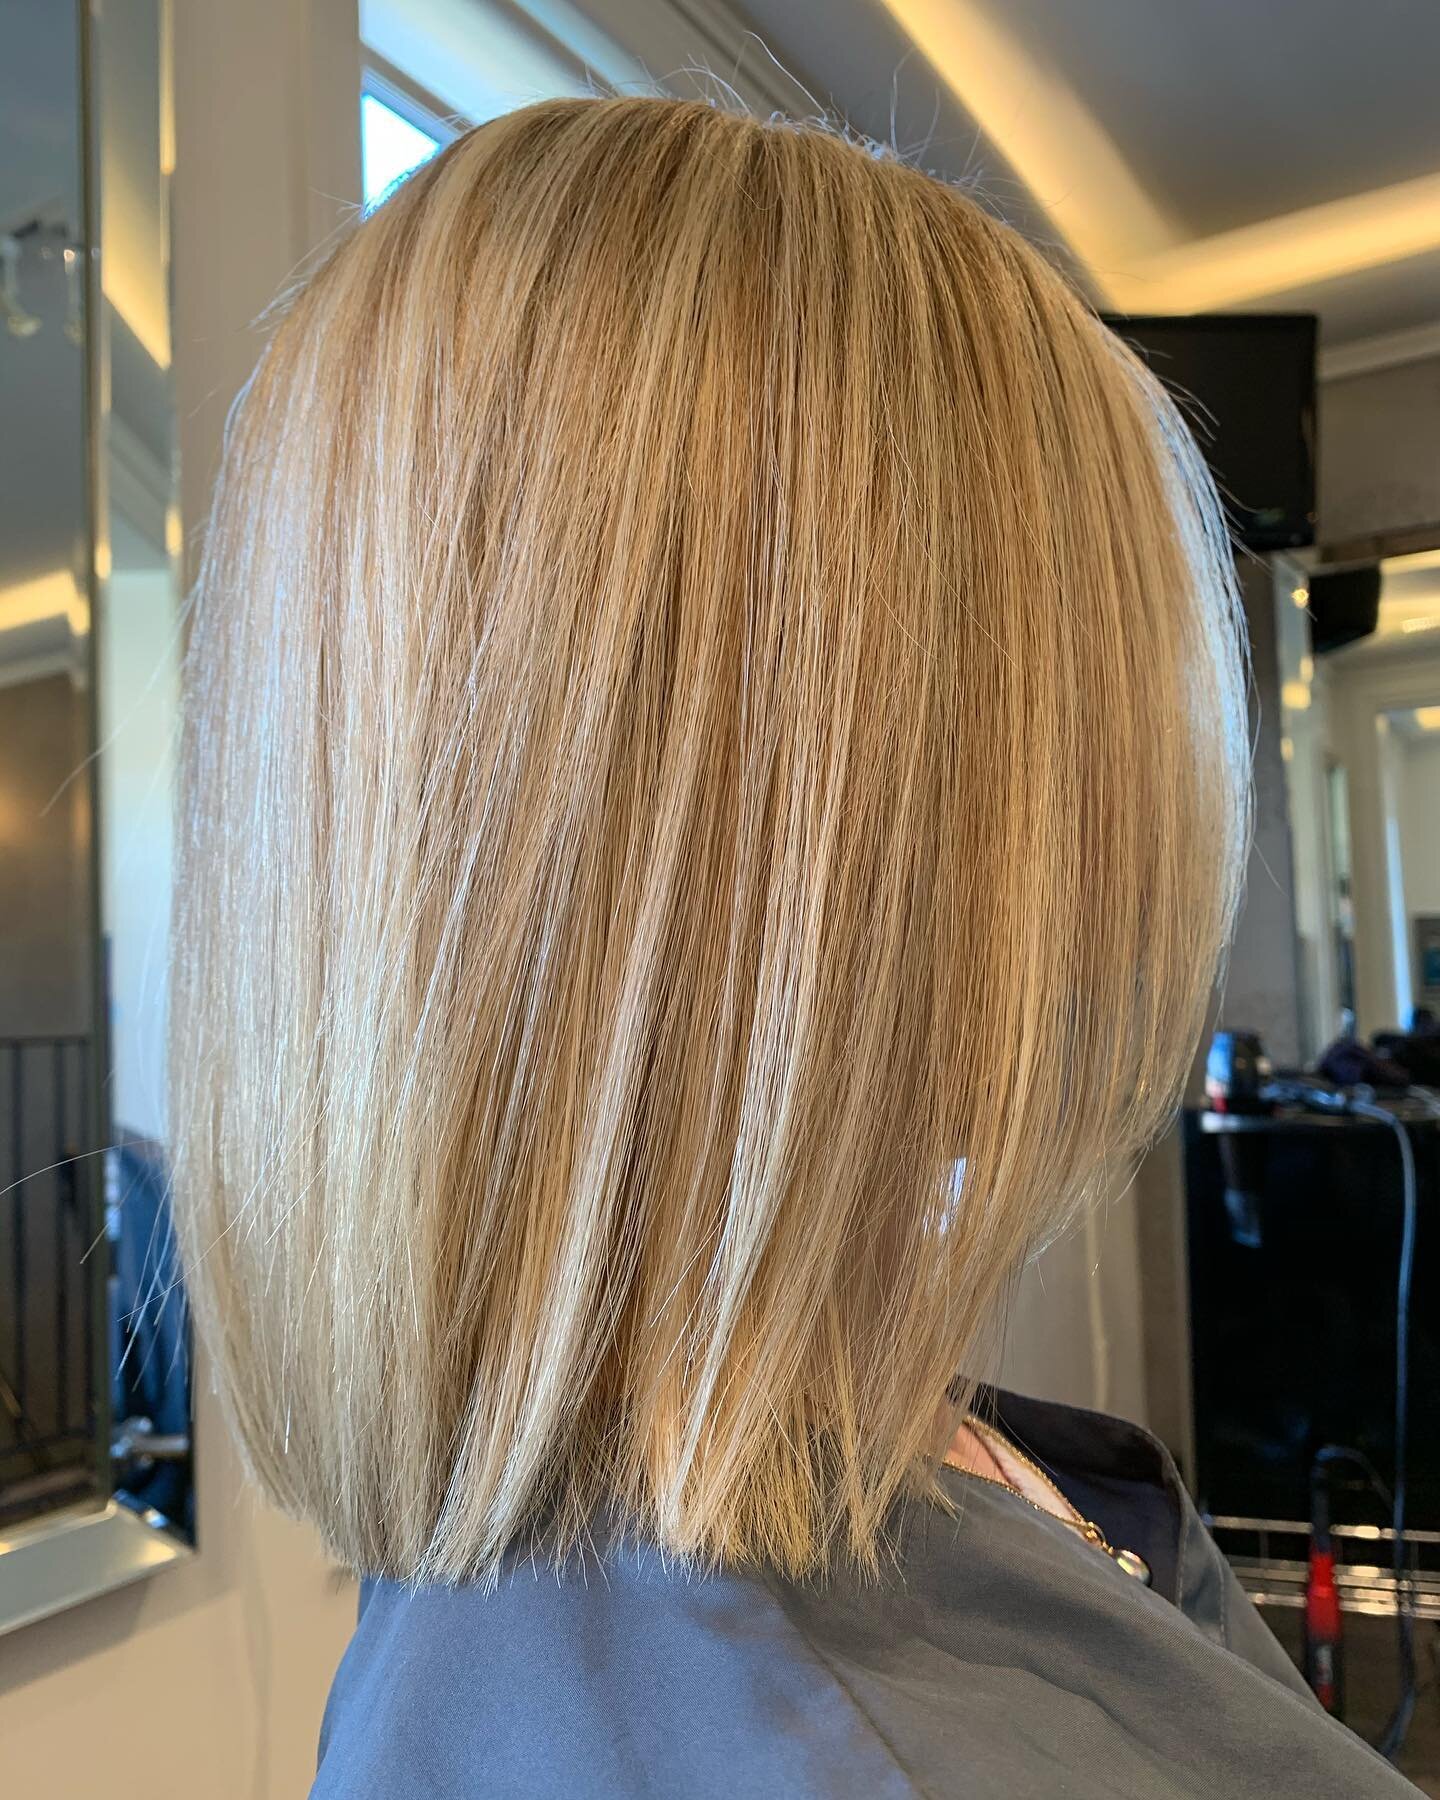 ⭐️𝗦 𝗛 𝗜 𝗡 𝗘 ⭐️𝗕 𝗥 𝗜 𝗚 𝗛 𝗧 ⭐️

A full head of highlights and cut to create this beautiful natural blonde! 

𝙎𝙒𝙄𝙋𝙀 𝙏𝙊 𝙎𝙀𝙀 𝙏𝙃𝙀 𝘽𝙀𝙁𝙊𝙍𝙀 !!!➡️➡️➡️➡️➡️➡️➡️➡️➡️

Colour by 𝐿 𝐼 𝒮 𝒜 👌
Cut/Style by 𝙰 𝙽 𝚃 𝙾 𝙽 𝙴 𝙻 𝙻 𝙰 ?